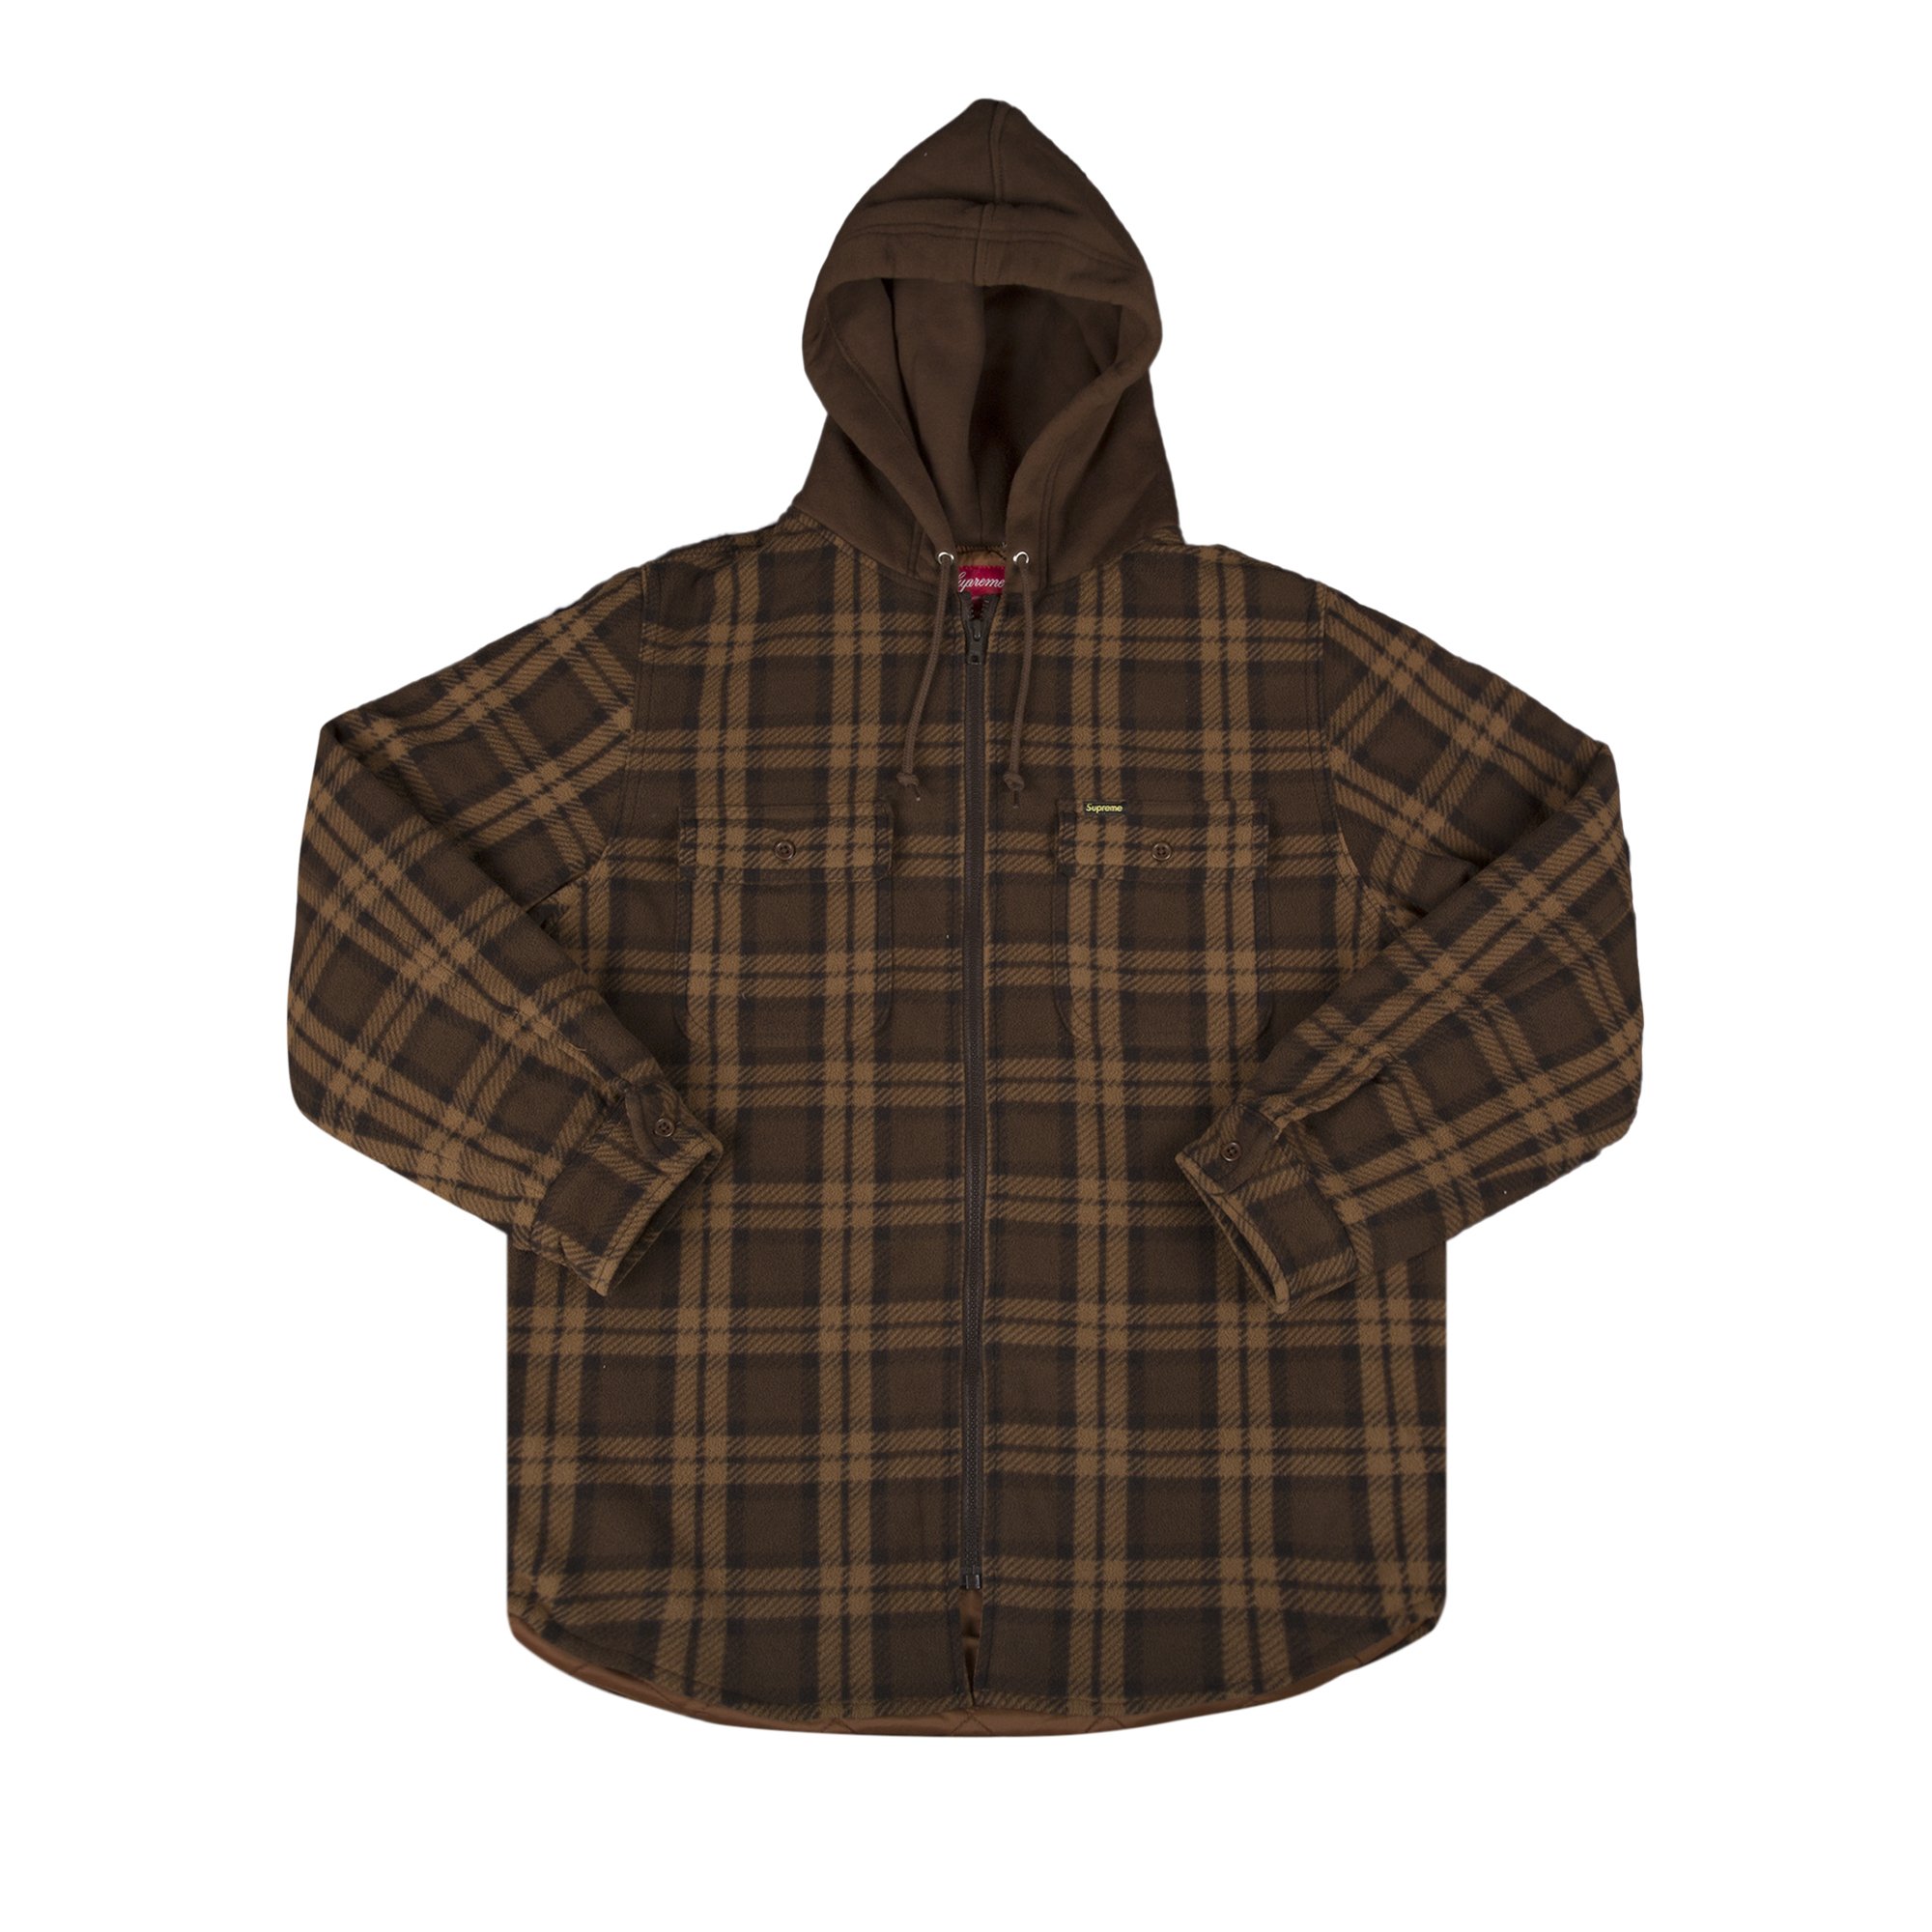 Buy Supreme Hooded Plaid Work Shirt 'Brown' - FW18S35 BROWN | GOAT